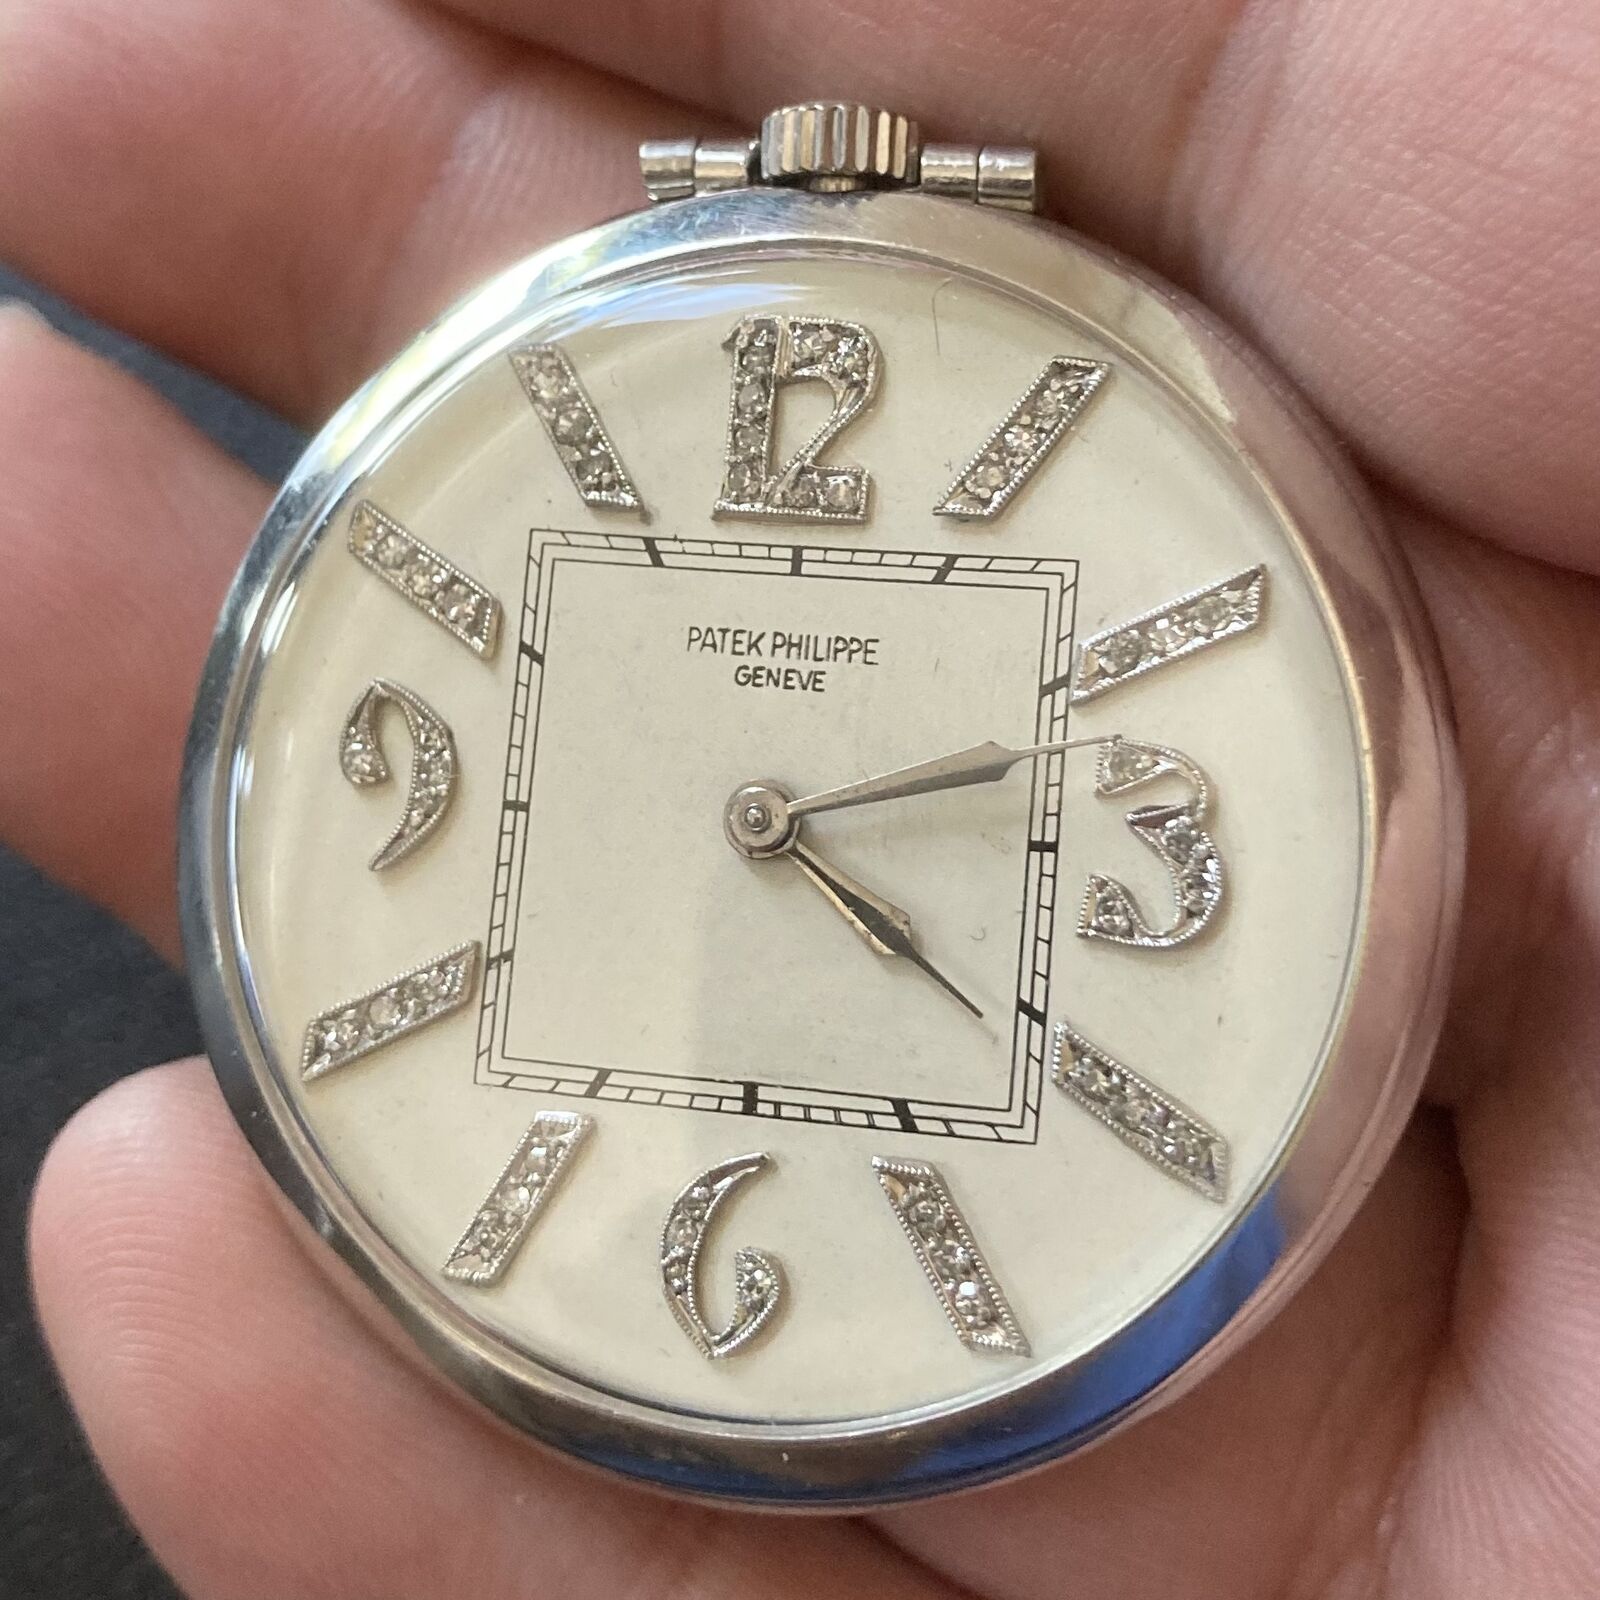 Patek Philippe Jewelry & Watches:Watches, Parts & Accessories:Watches:Pocket Watches Ultra Rare! Patek Philippe Platinum Diamond 14s Pocket Watch c. 1885